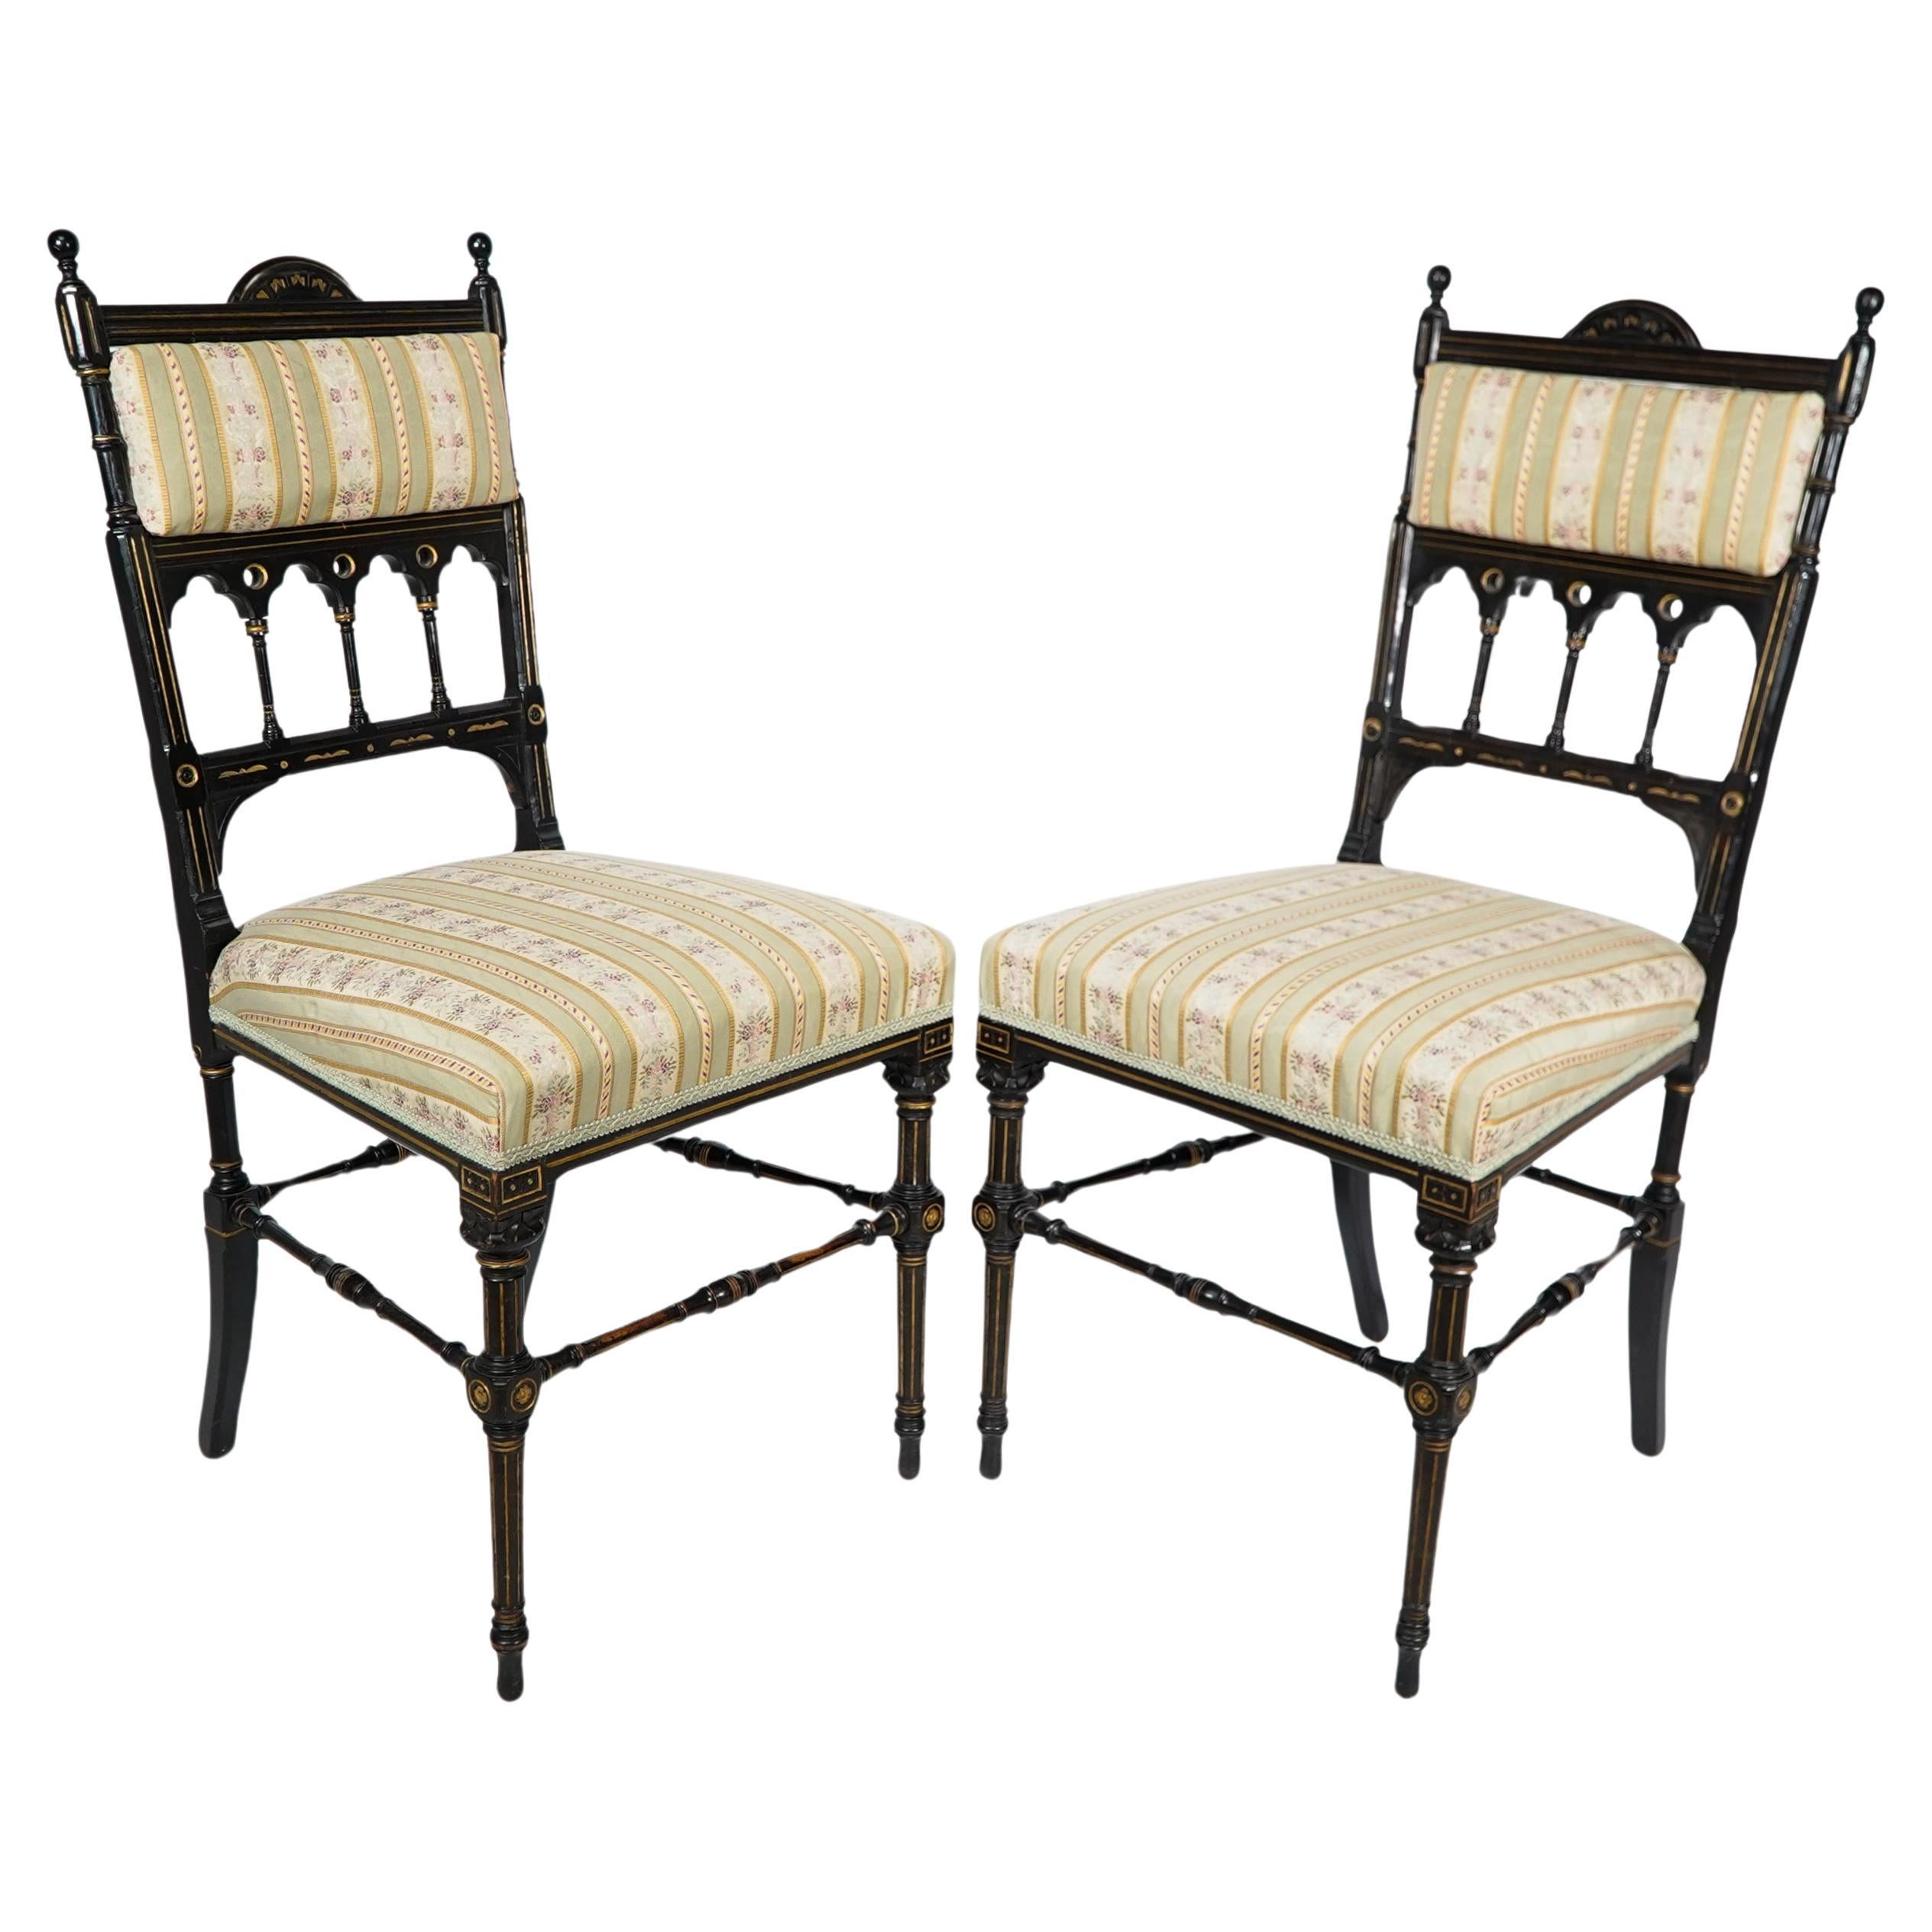 Whytock & Reid. A pair of Aesthetic Movement ebonized & parcel gilt side chairs. For Sale